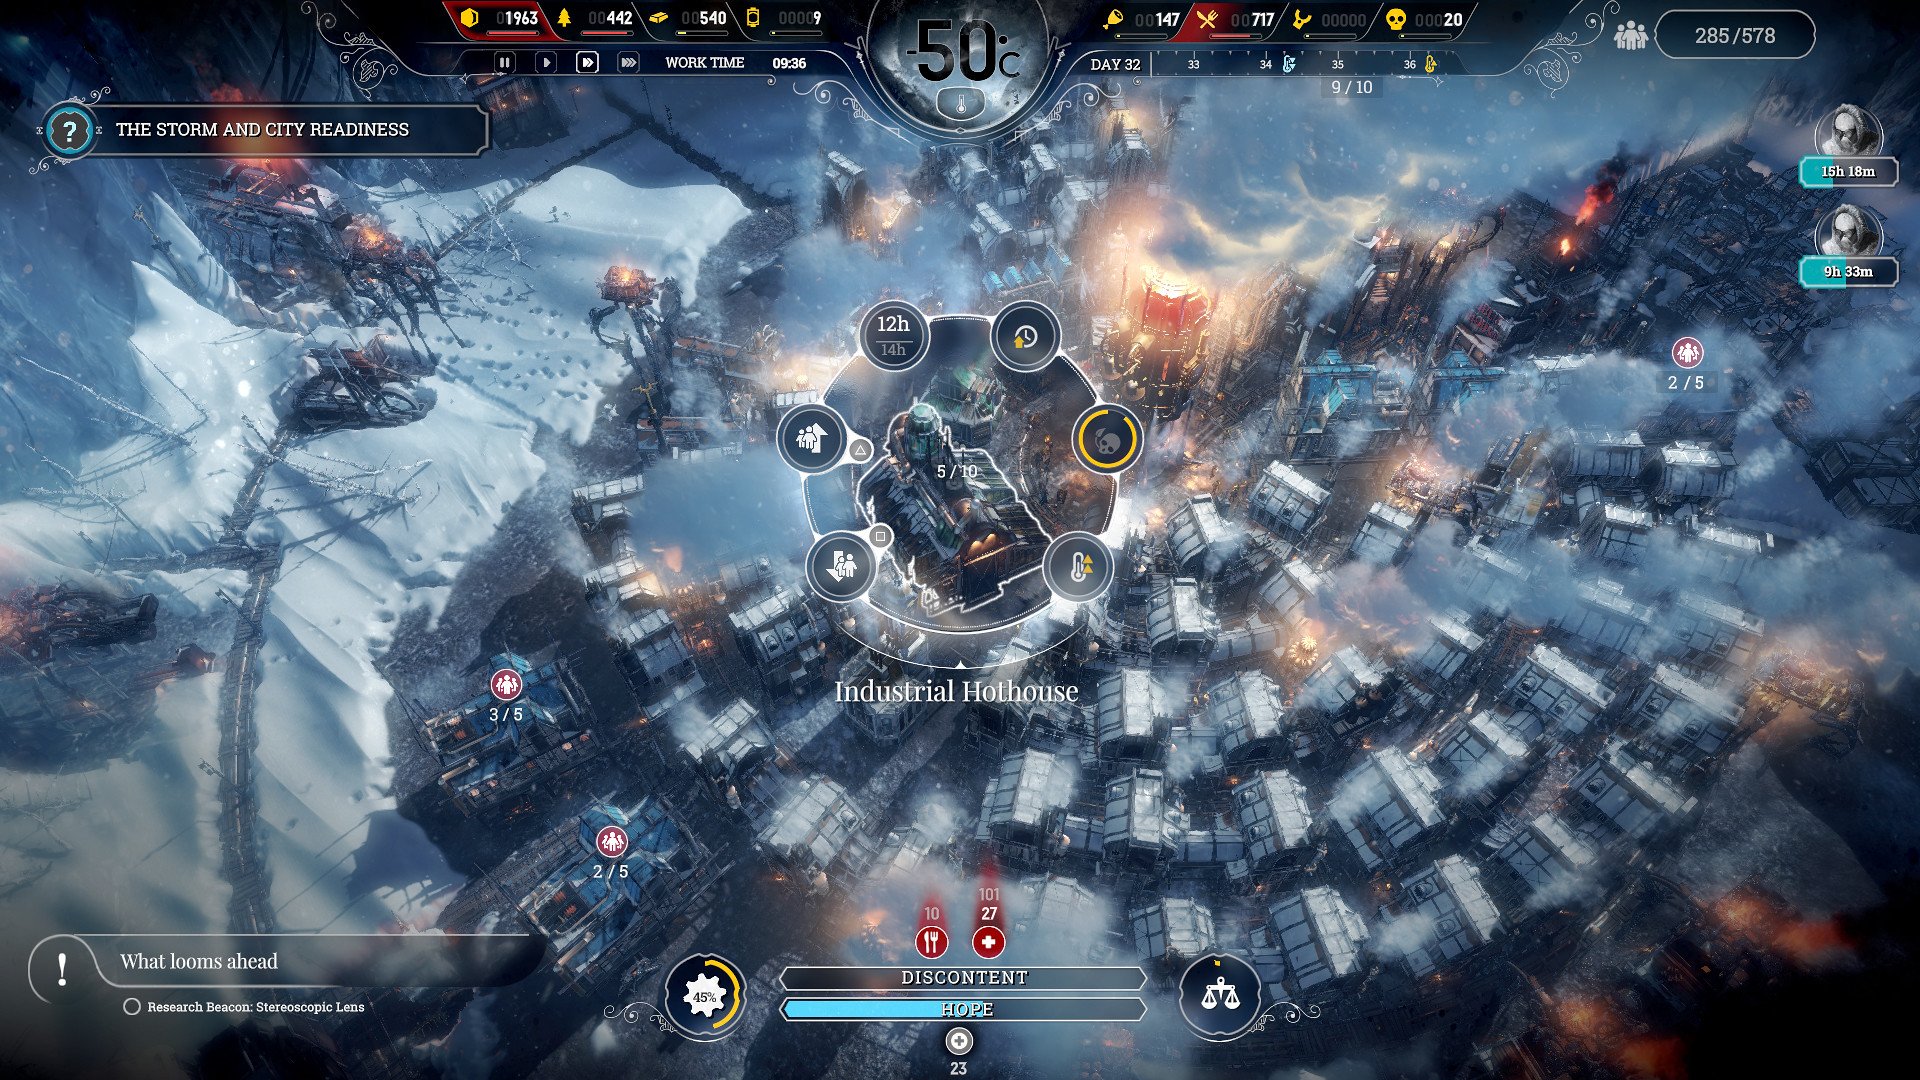 PlayStation on Twitter: "Guide humanity through endless winter in Frostpunk: Console Edition, a strategy survival game out now for PS4: https://t.co/DL8TJoAeX0 https://t.co/R2MYNmEfsF" / Twitter